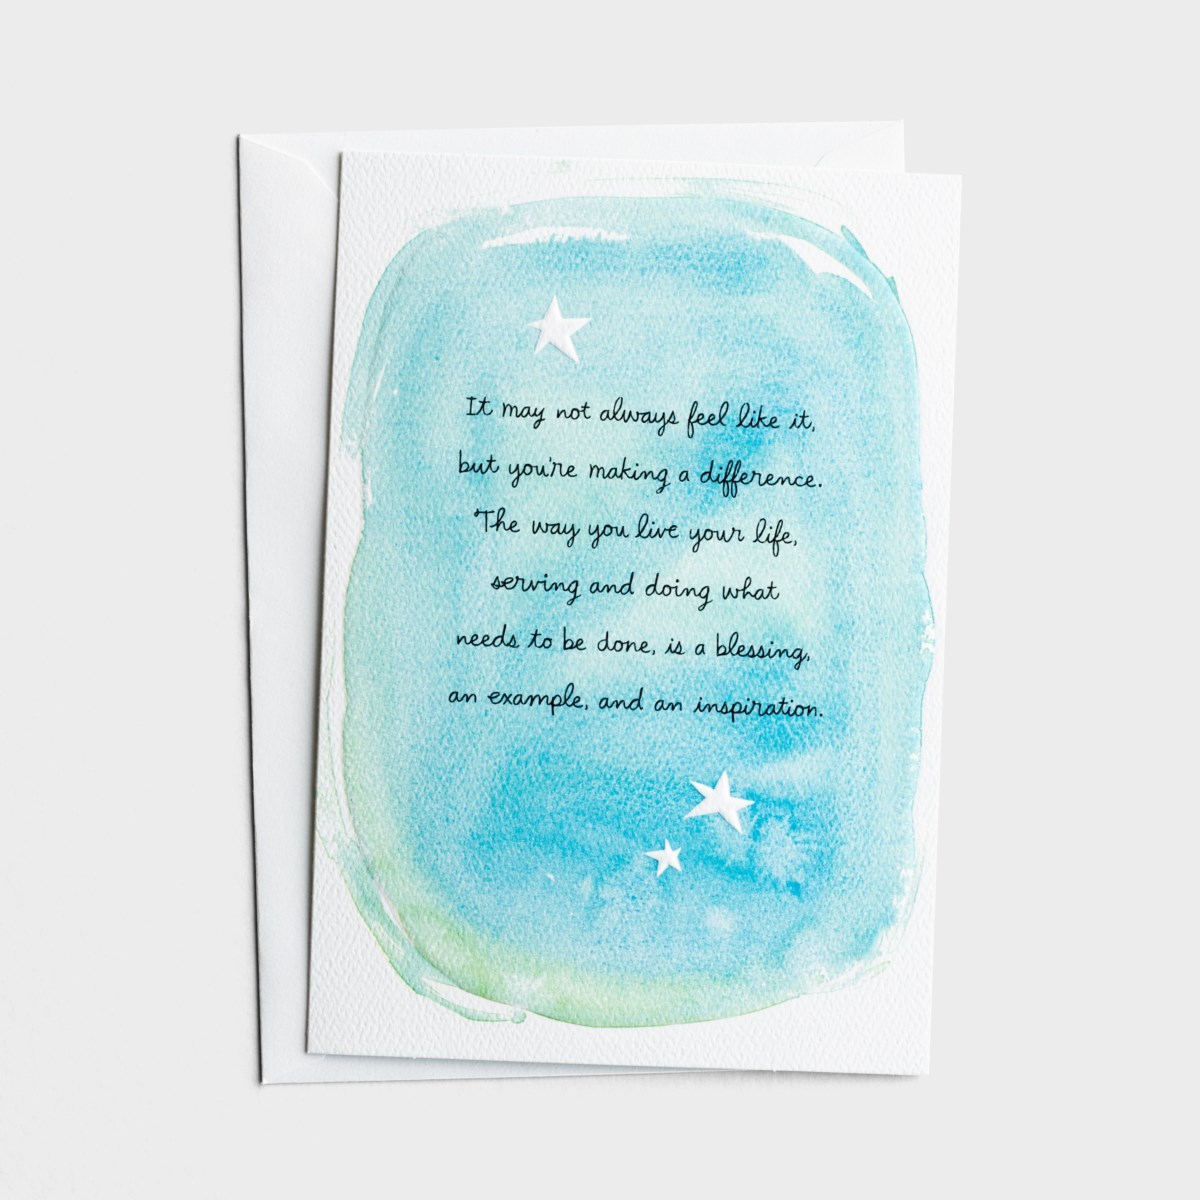 Appreciation - You're Making a Difference - Set of 6 Greeting Cards